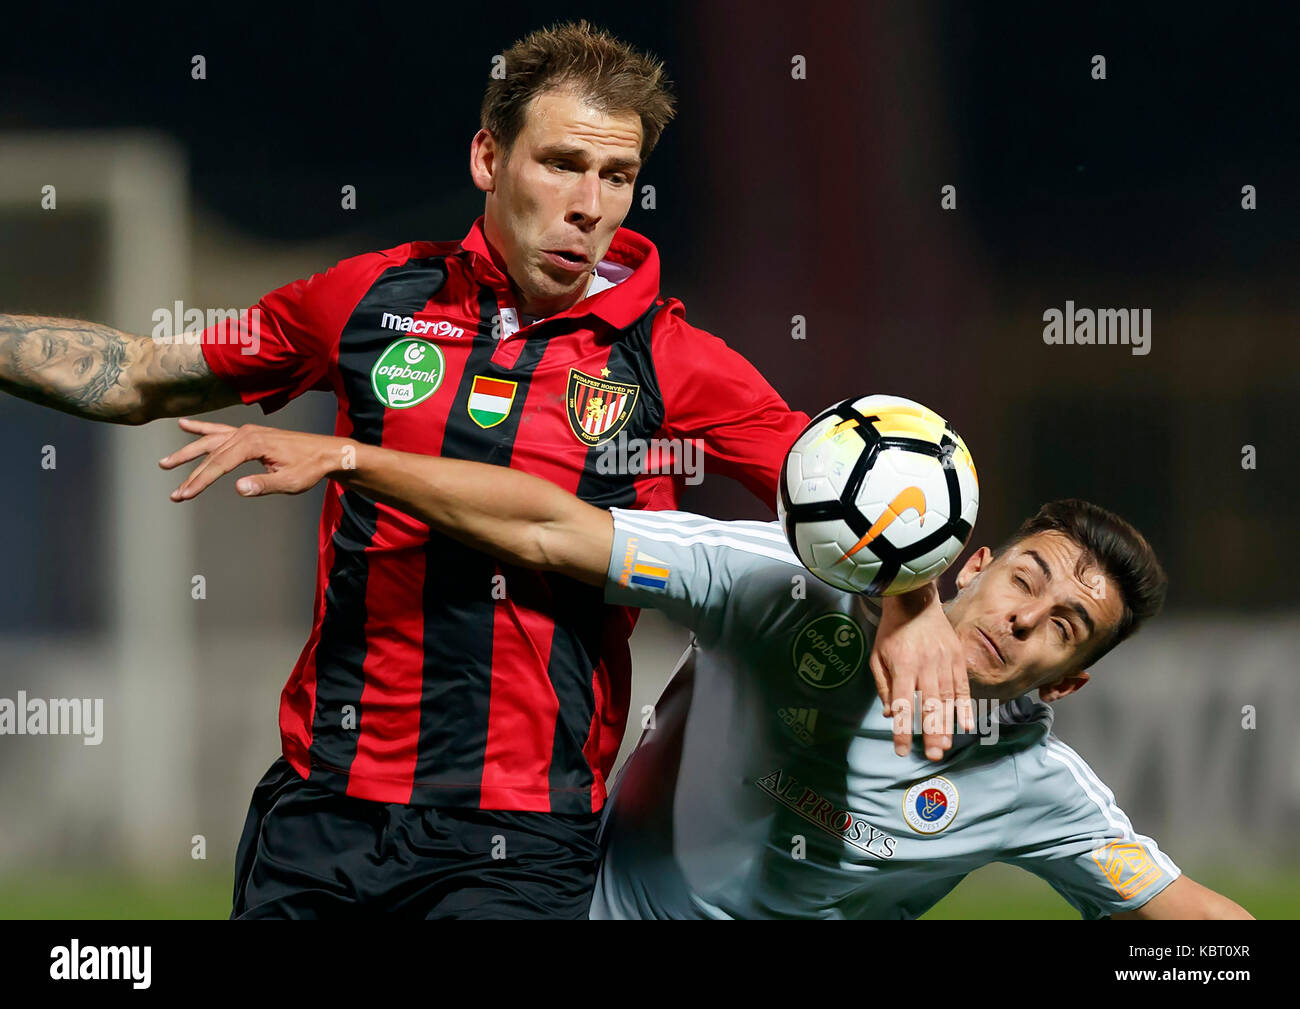 Budapest, Hungary. 30th Sep, 2017.  Ivan Lovric (L) of Budapest Honved battles for the ball with Balint Gaal (R) of Vasas FC during the Hungarian OTP Bank Liga match between Budapest Honved and Vasas FC at Bozsik Stadium on September 30, 2017 in Budapest, Hungary. Credit: Laszlo Szirtesi/Alamy Live News Stock Photo